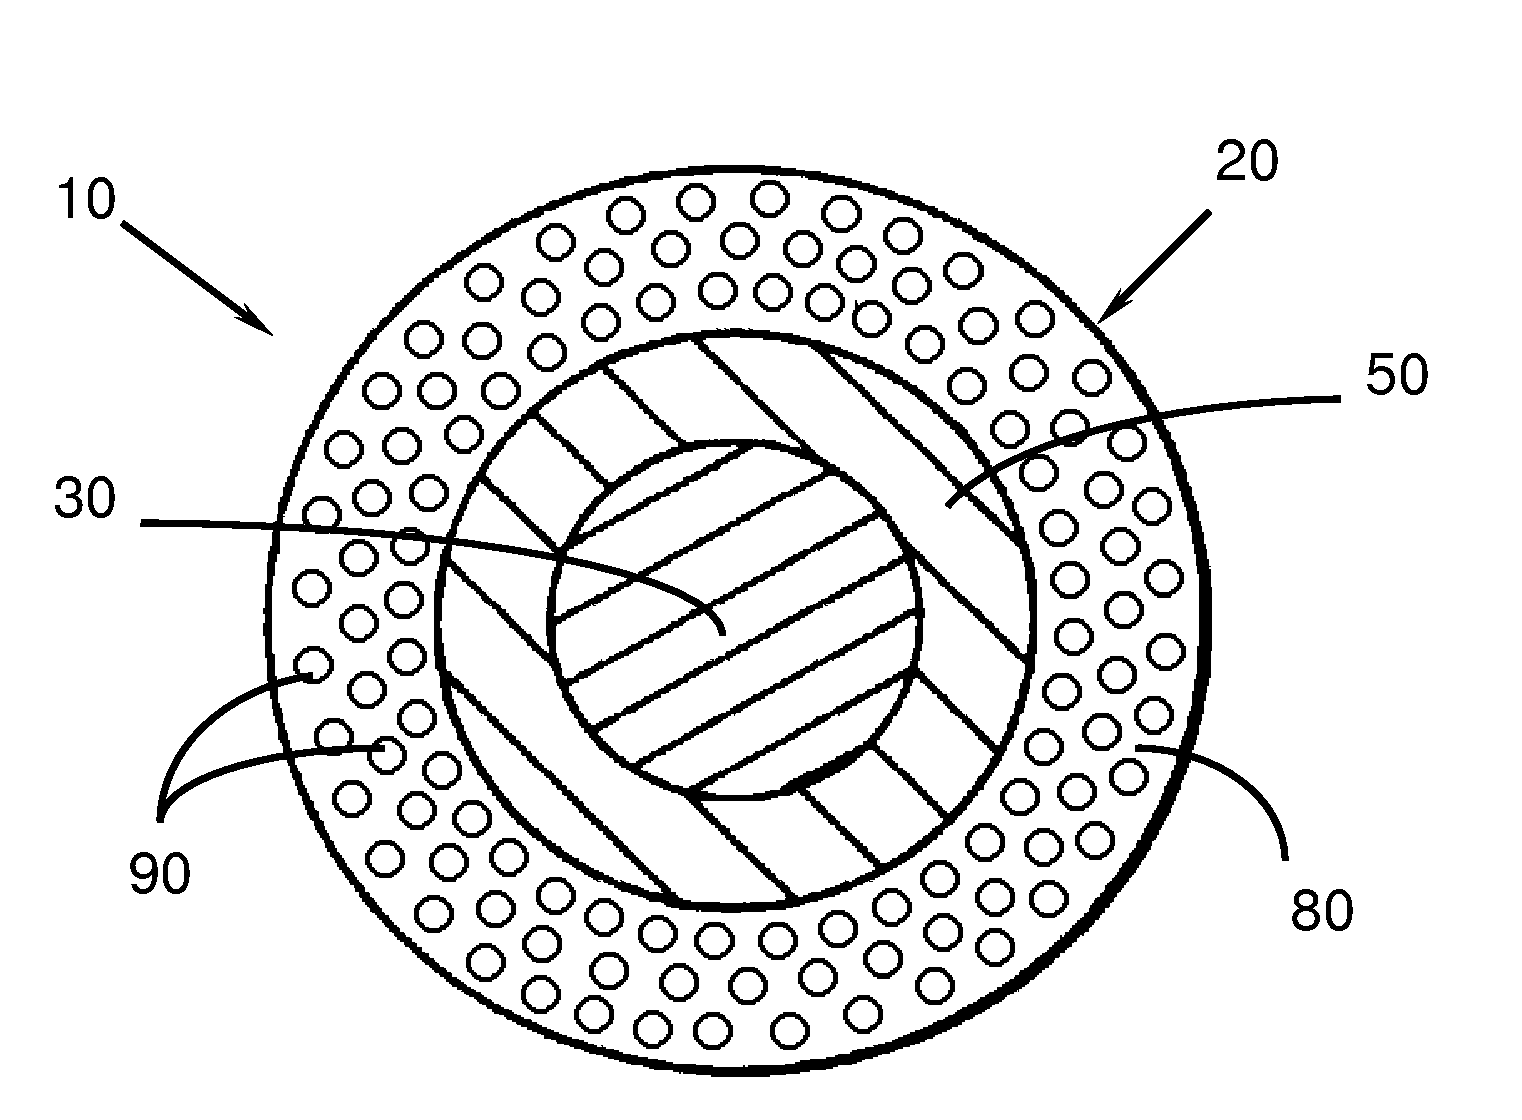 Magnet wire with coating added with fullerene-type nanostructures